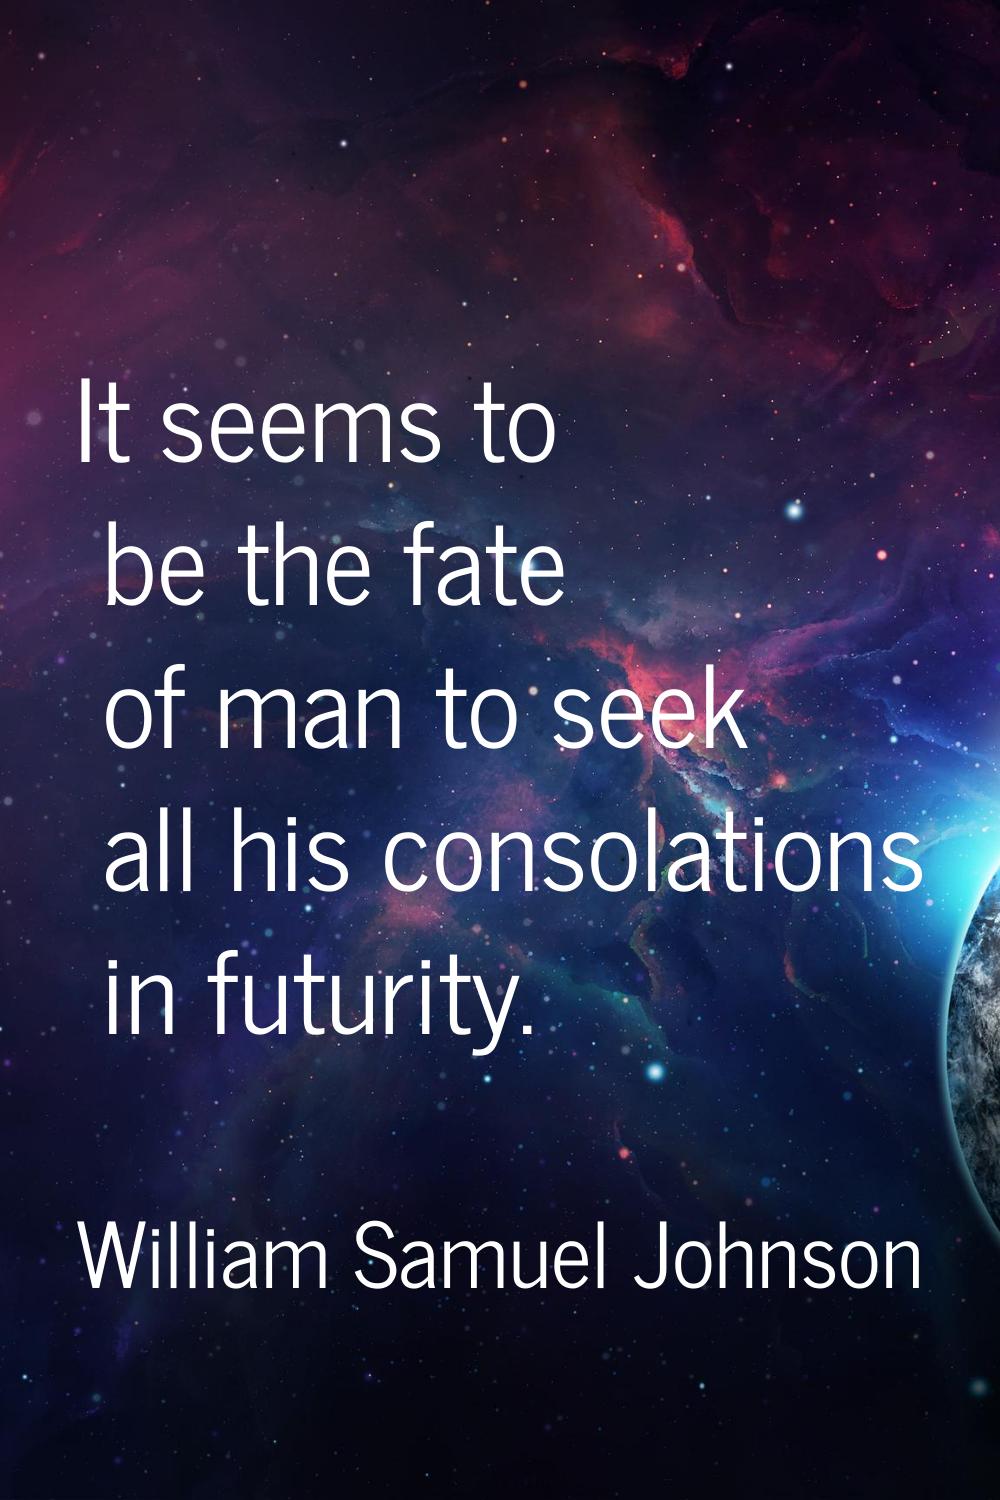 It seems to be the fate of man to seek all his consolations in futurity.